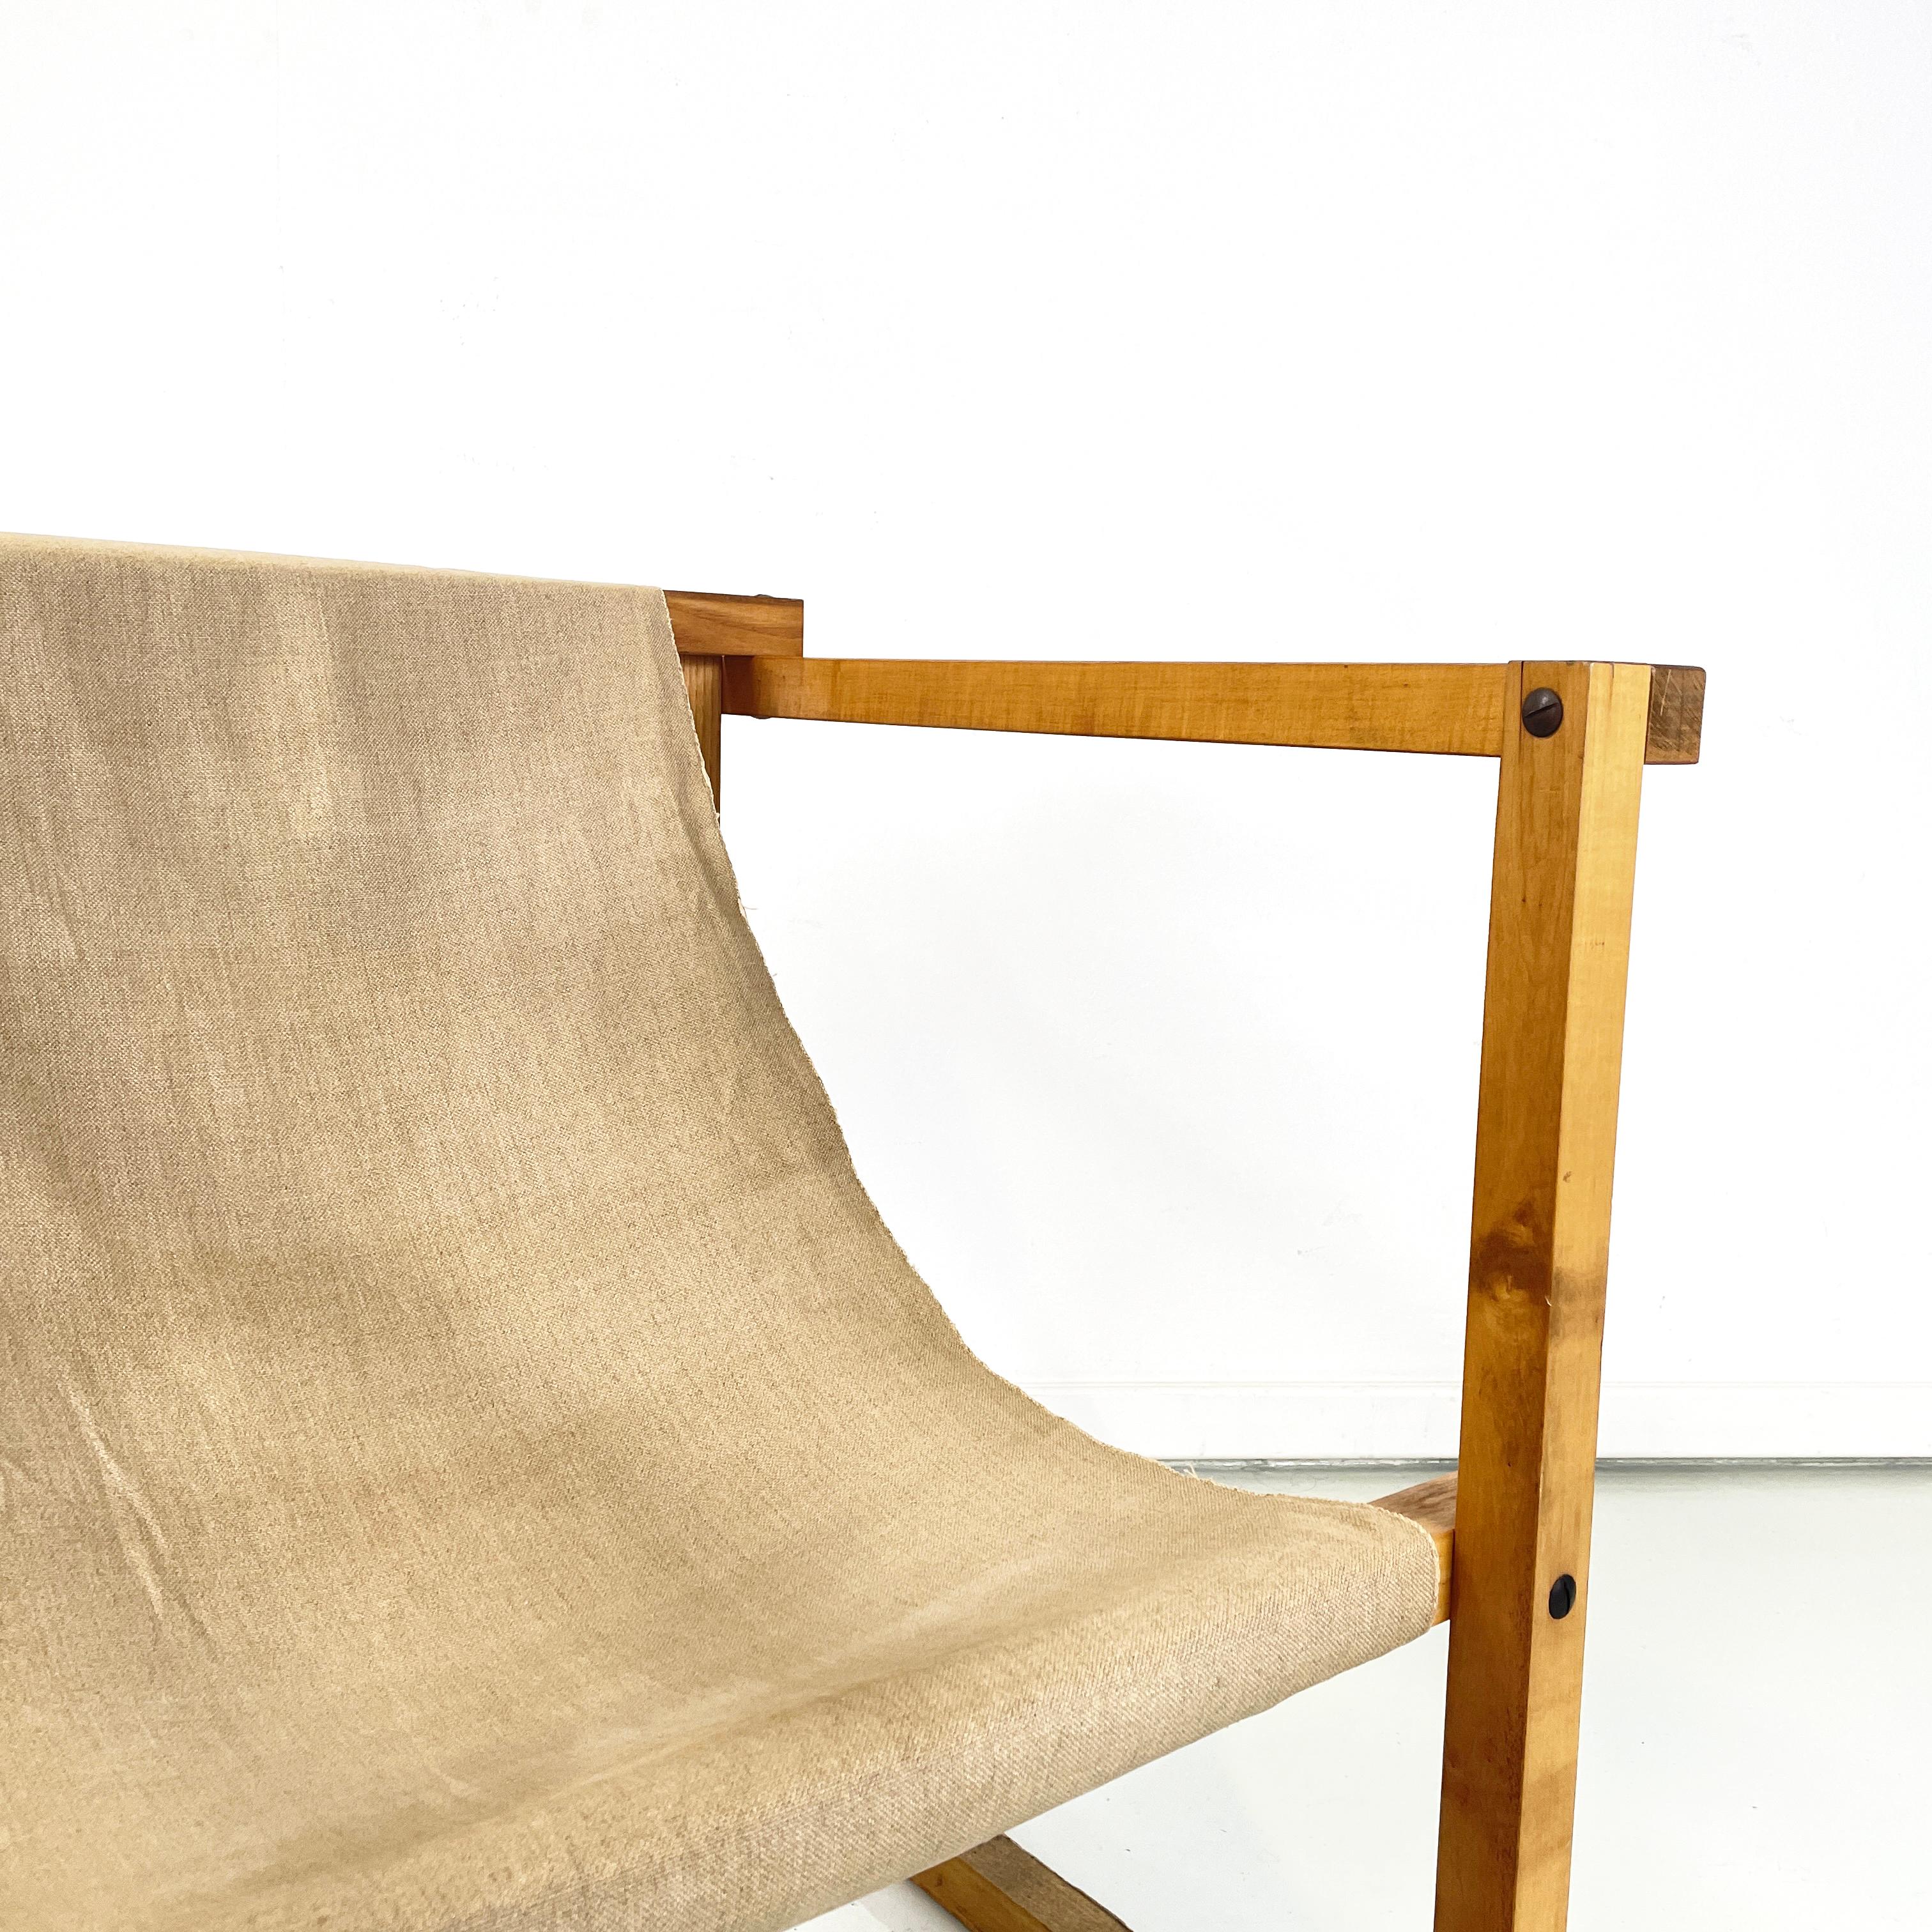 Italian mid-century modern Wood armchair with beige fabric by Pino Pedano, 1970s For Sale 1